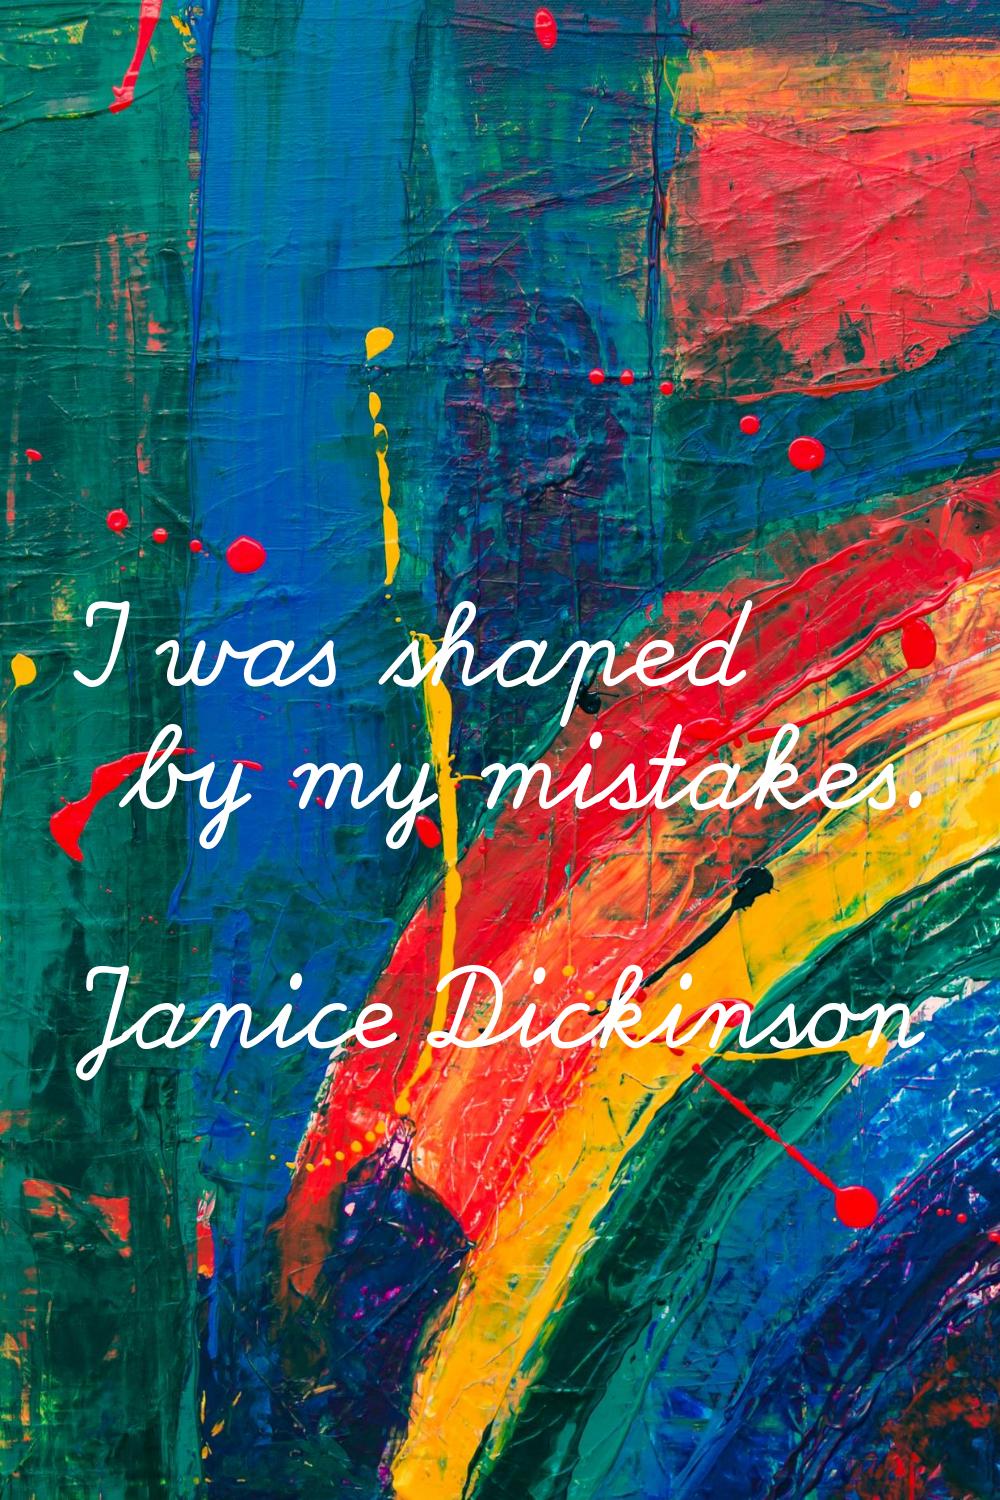 I was shaped by my mistakes.